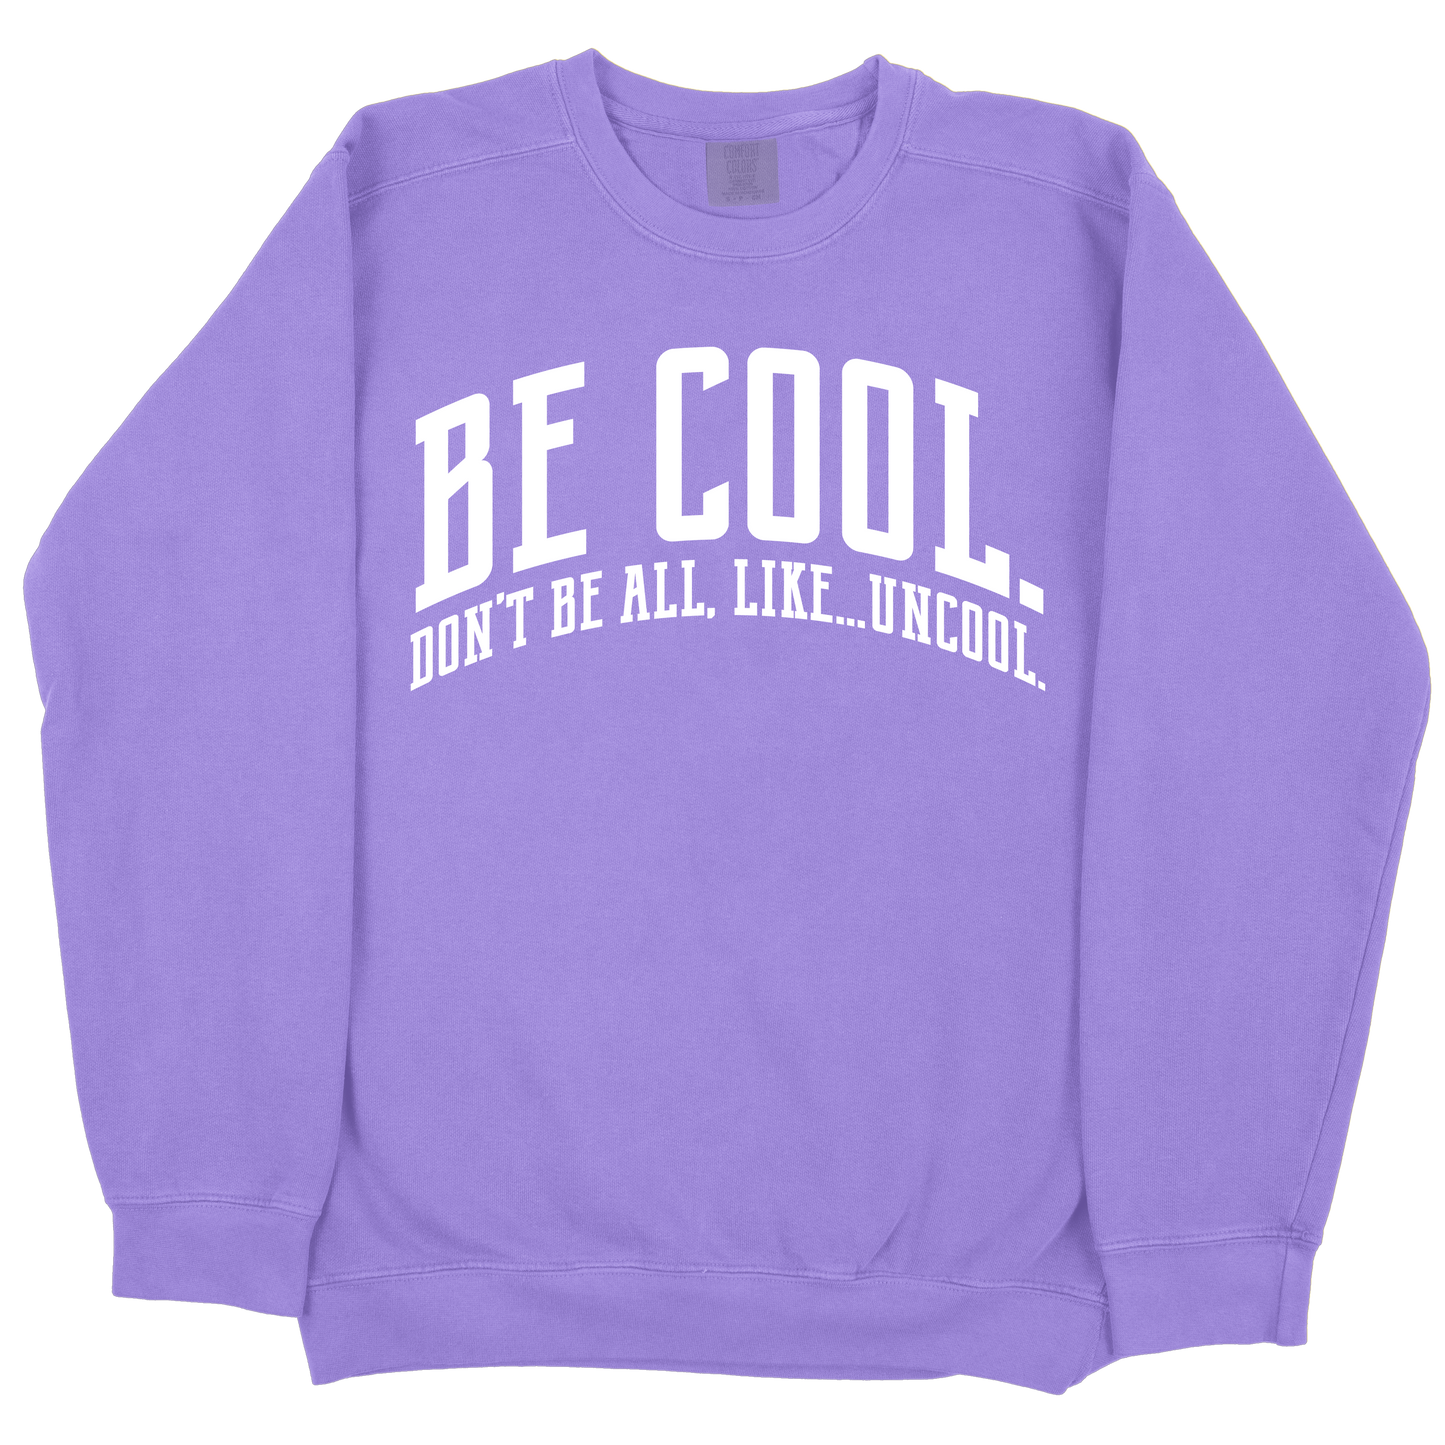 Be Cool. Don't Be All, Like...Uncool CC Sweatshirt - Violet